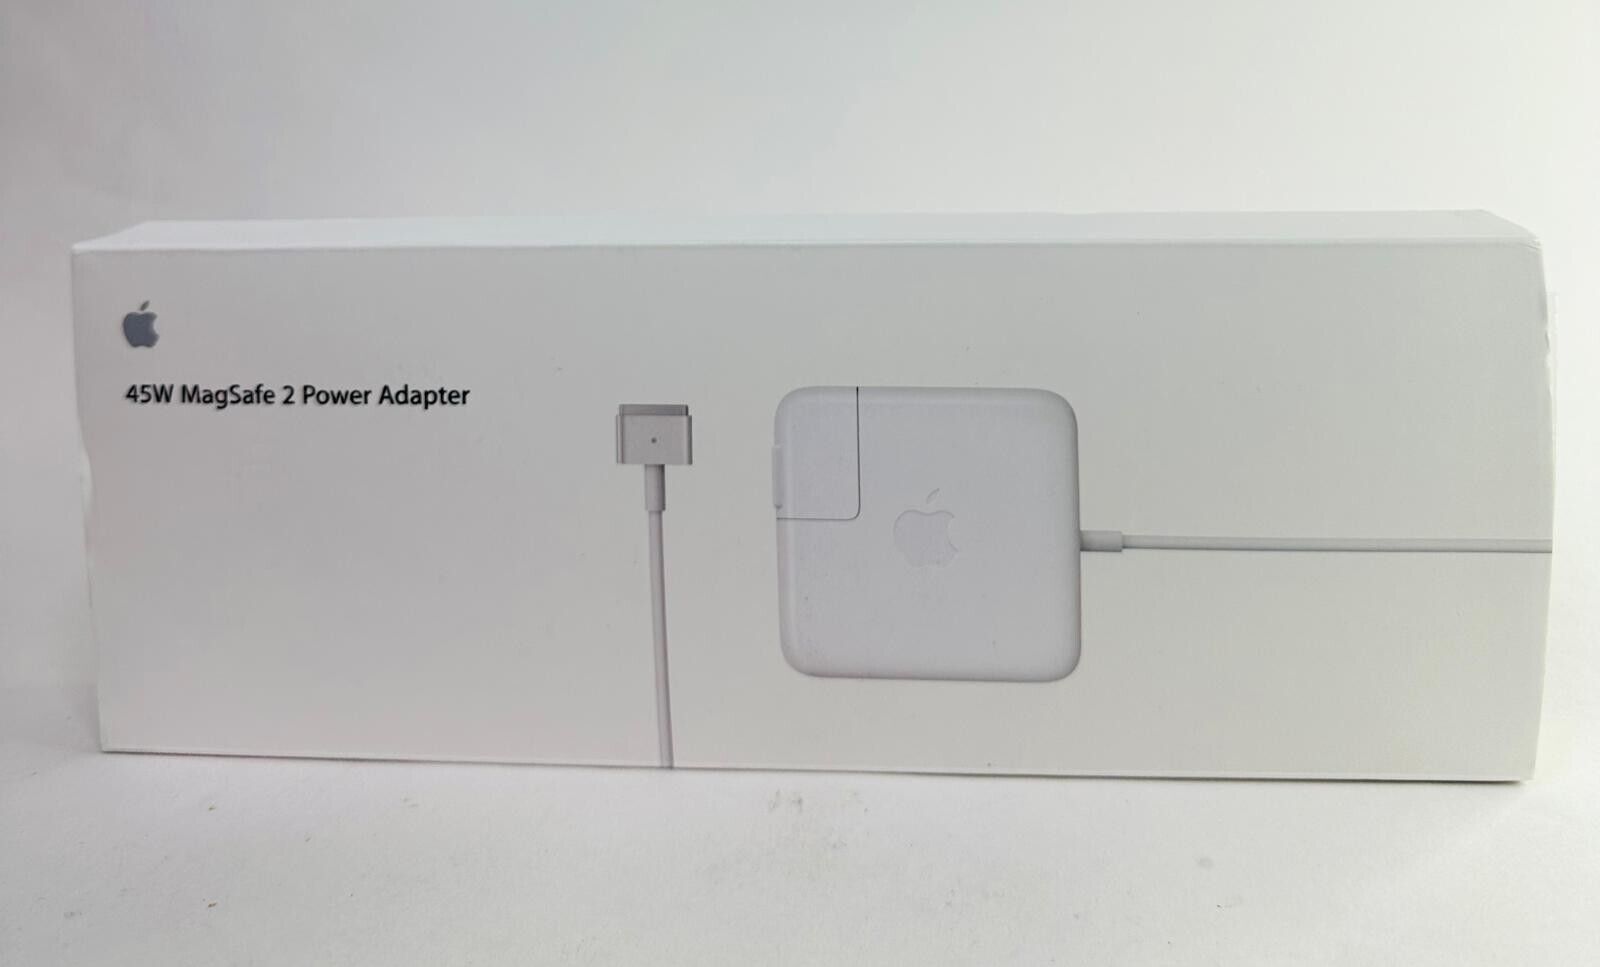 45W MAGSAFE 2 POWER ADAPTER